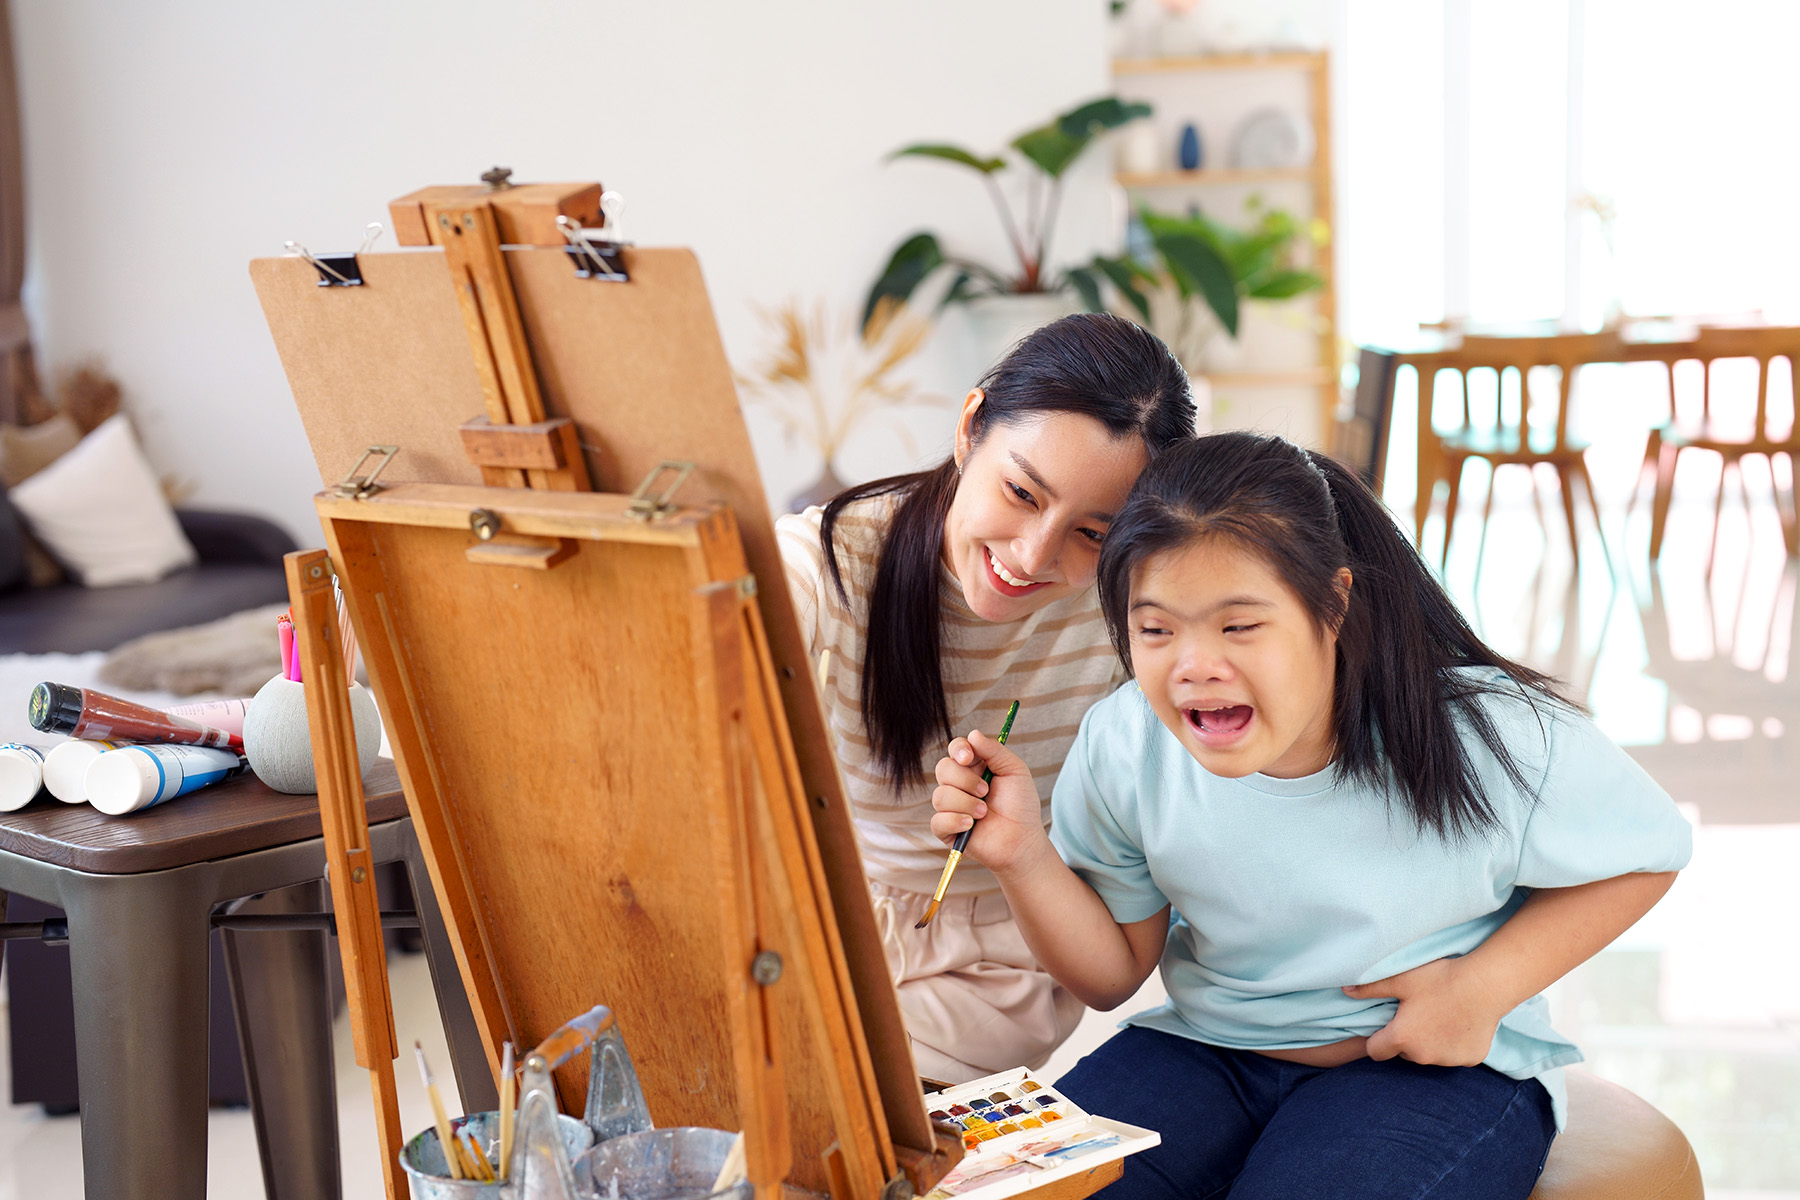 Happy smiling mother and daughter painting using an easel. The child has down syndrome and is holding the brush wrong. Still, they're having fun.